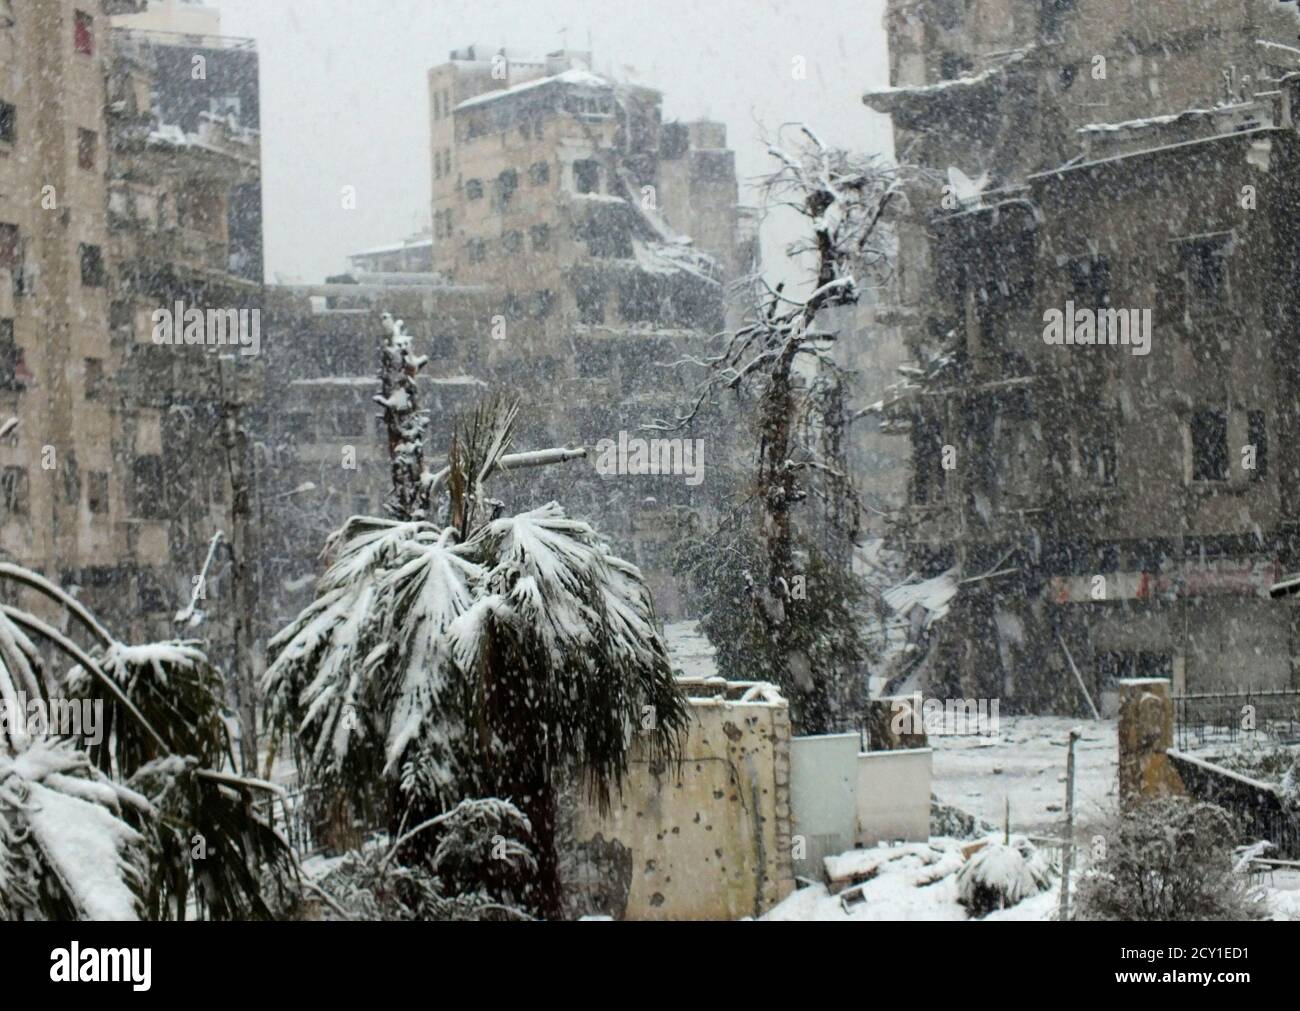 Snow falls over damaged buildings at Jouret al Shayah area in Homs January 9, 2013. REUTERS/Yazan Homsy       (SYRIA - Tags: CIVIL UNREST POLITICS ENVIRONMENT) Stock Photo